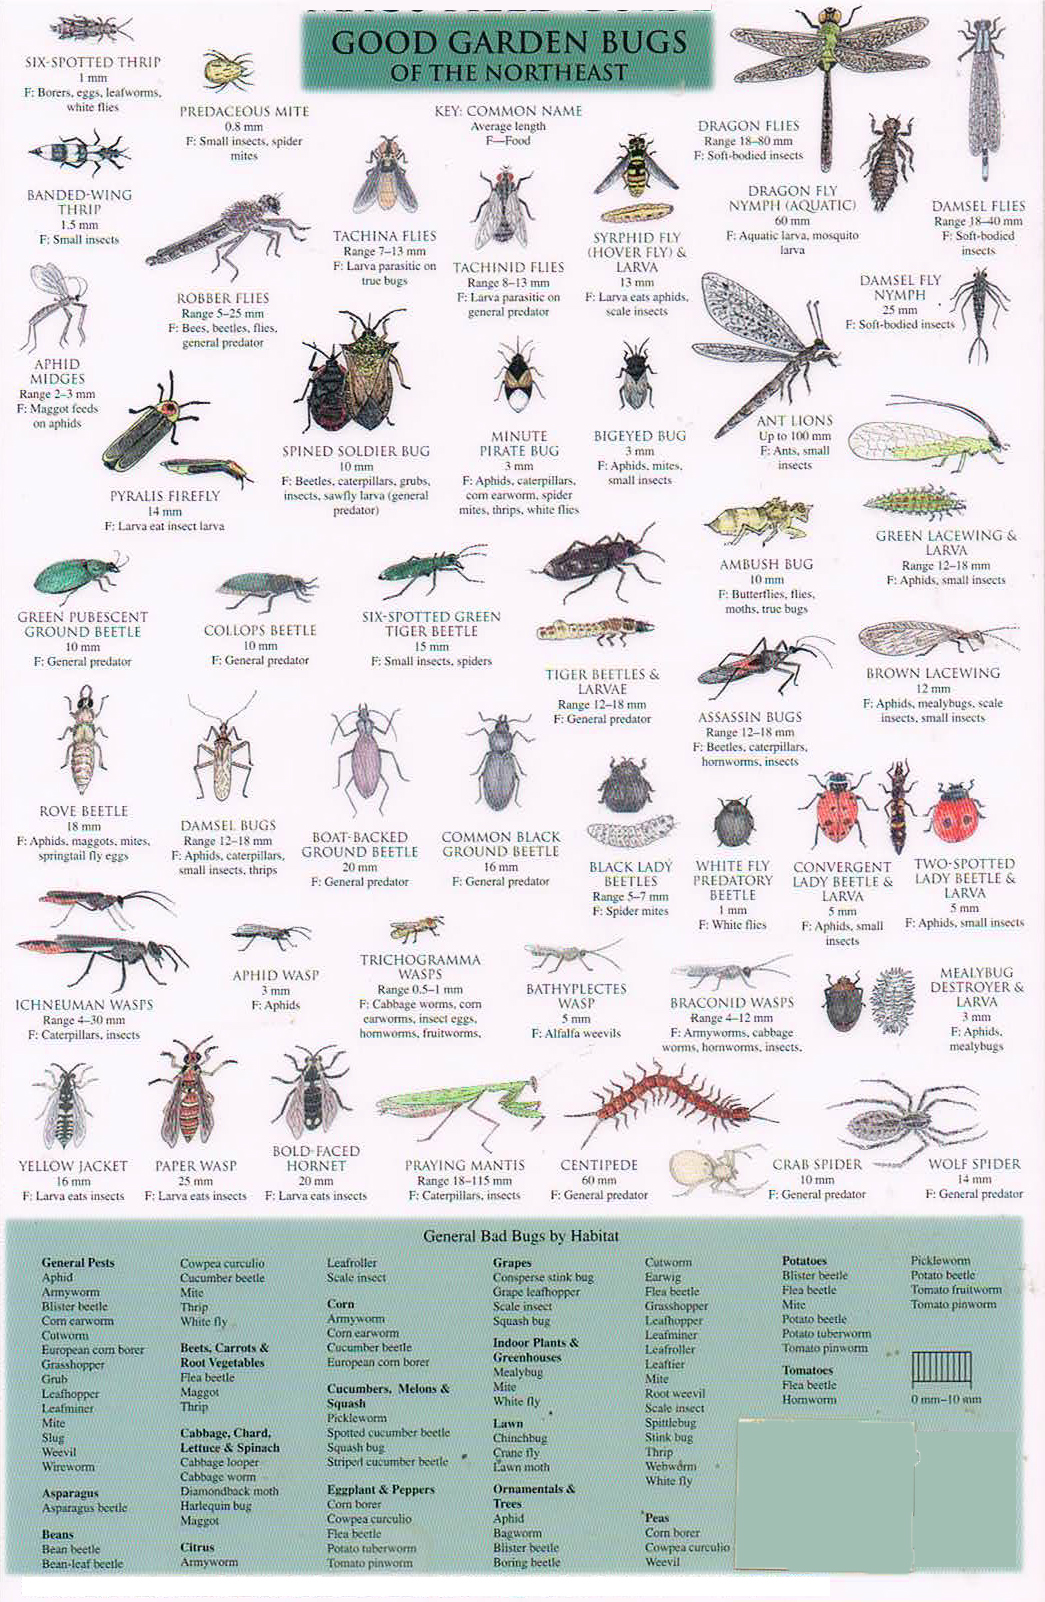 Good Bugs Vs Bad Bugs guide of the Northeast Garden